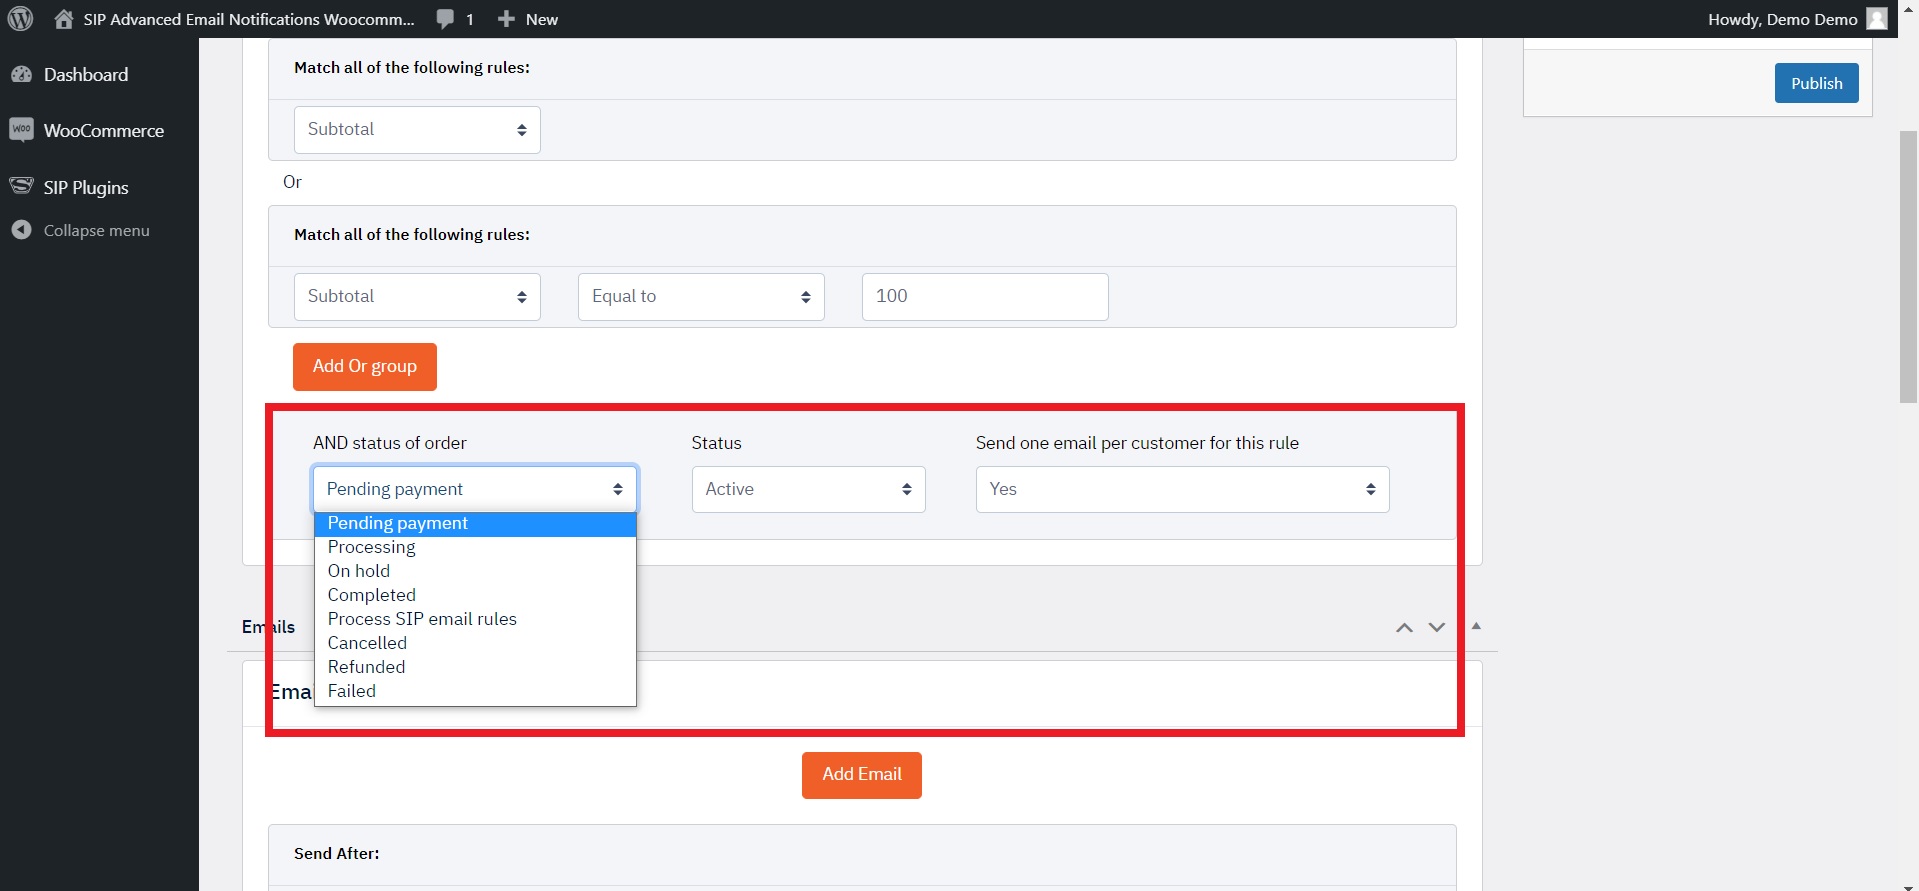 Next, you can configure the rule based on the status of the order